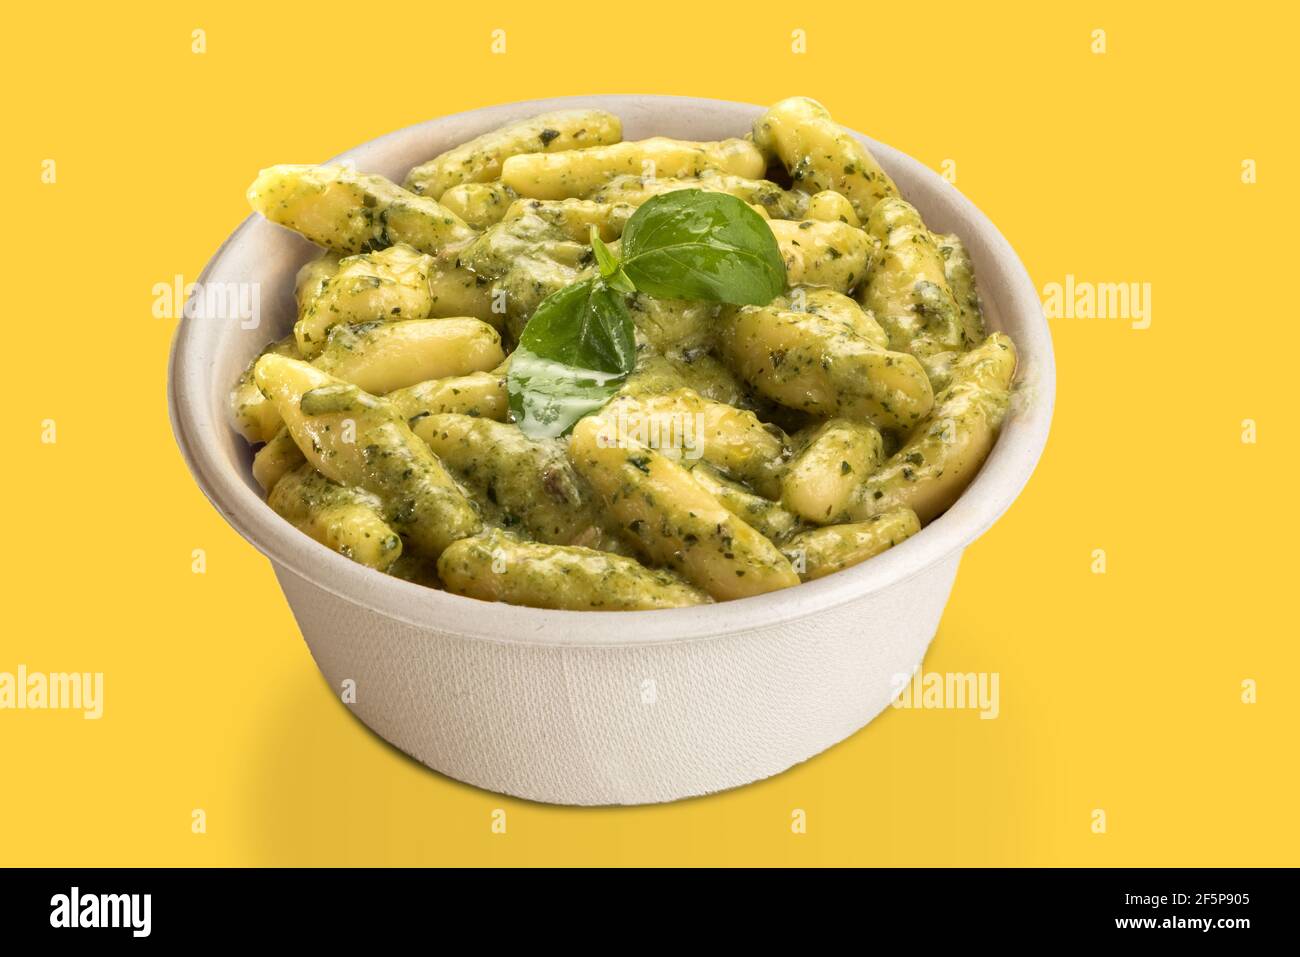 Gnocchi with Genoese pesto sauce in takeaway cardboard plate, isolated on yellow background Stock Photo